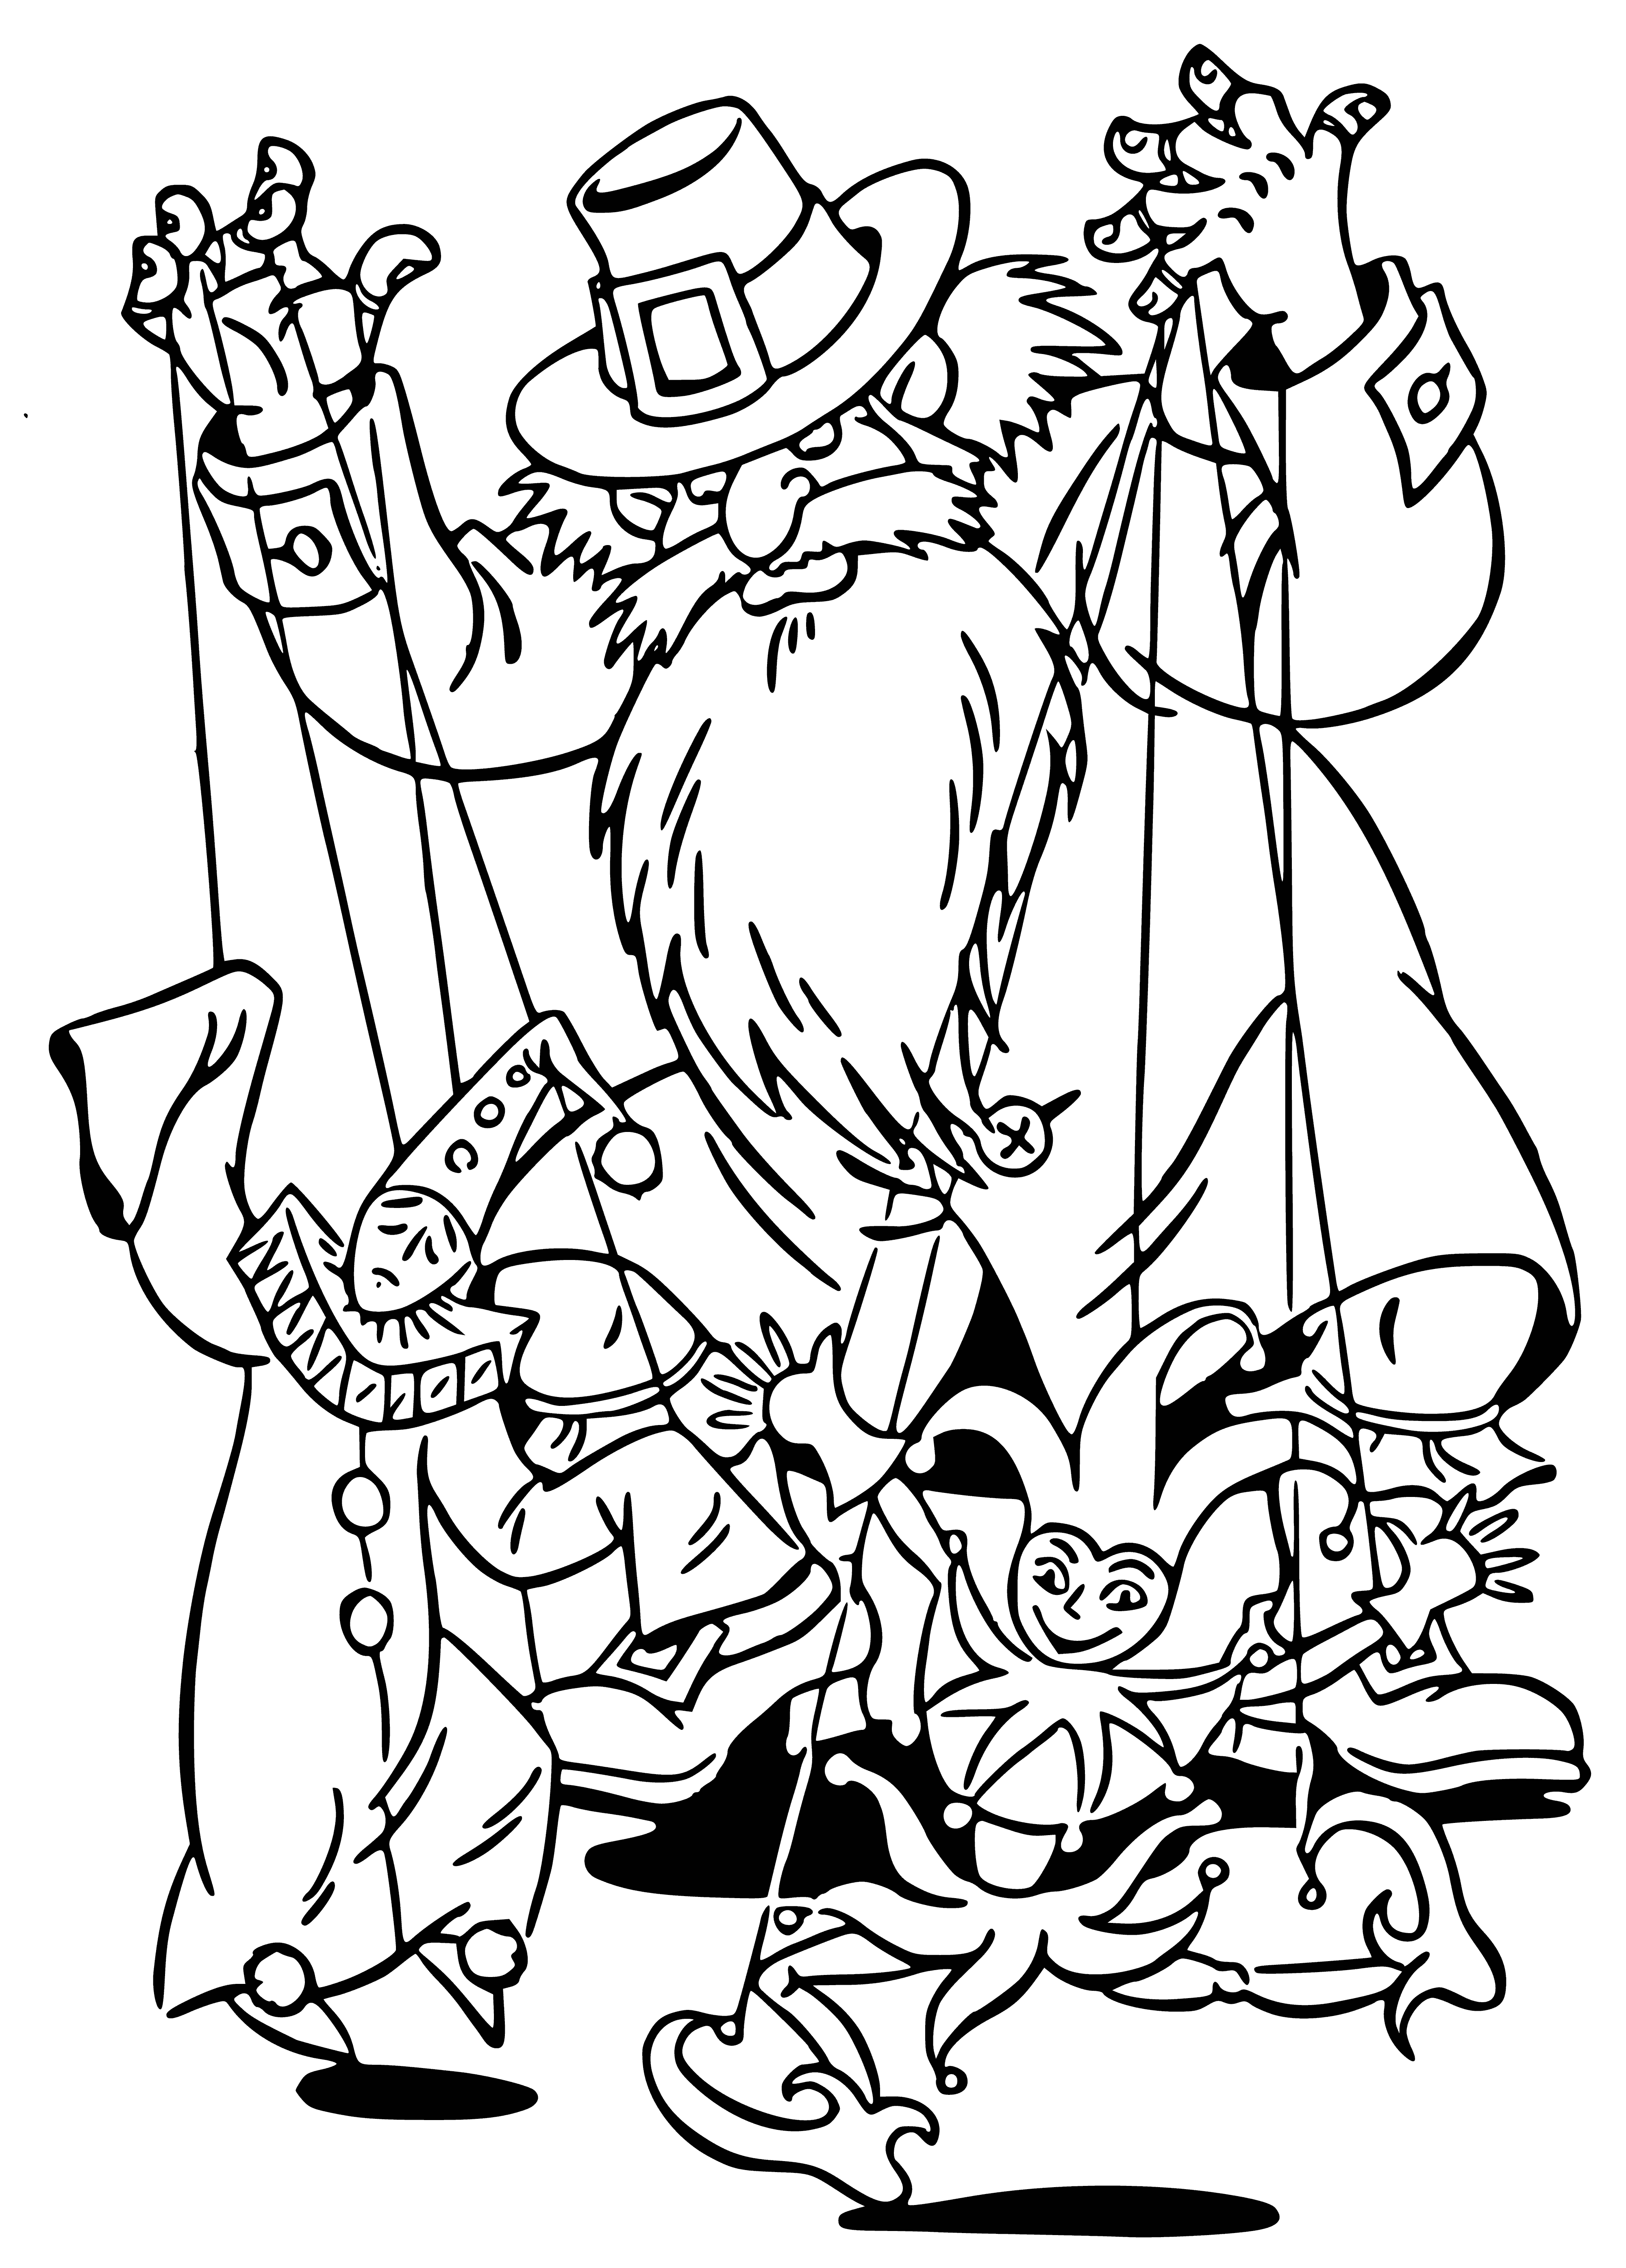 coloring page: An ancient book with text and coloring pages. In the middle: a puppet surrounded by a bearded man, woman with a flower, fox and cat looking at it with admiration.